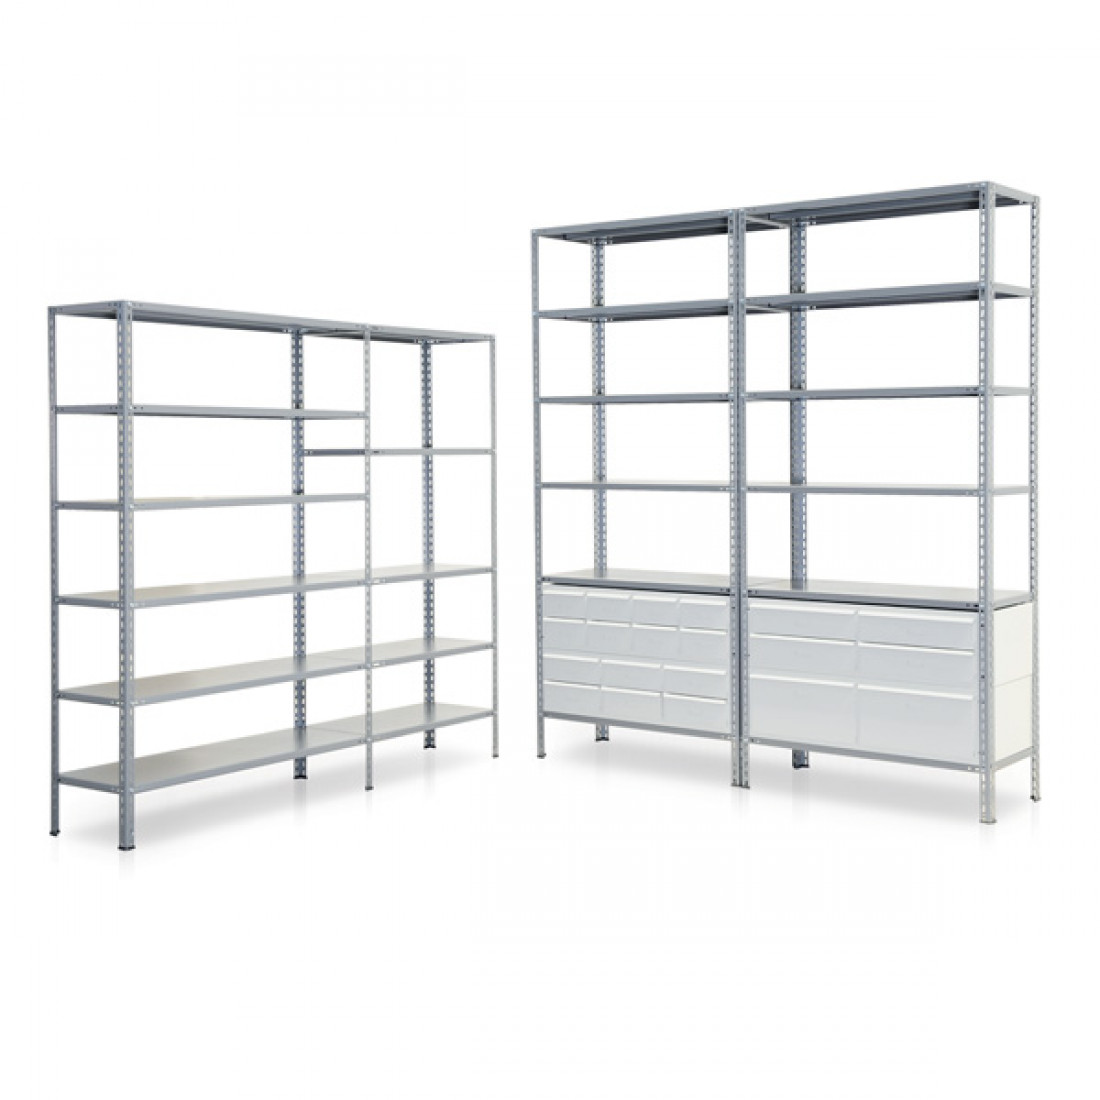 BOLTED SHELVING